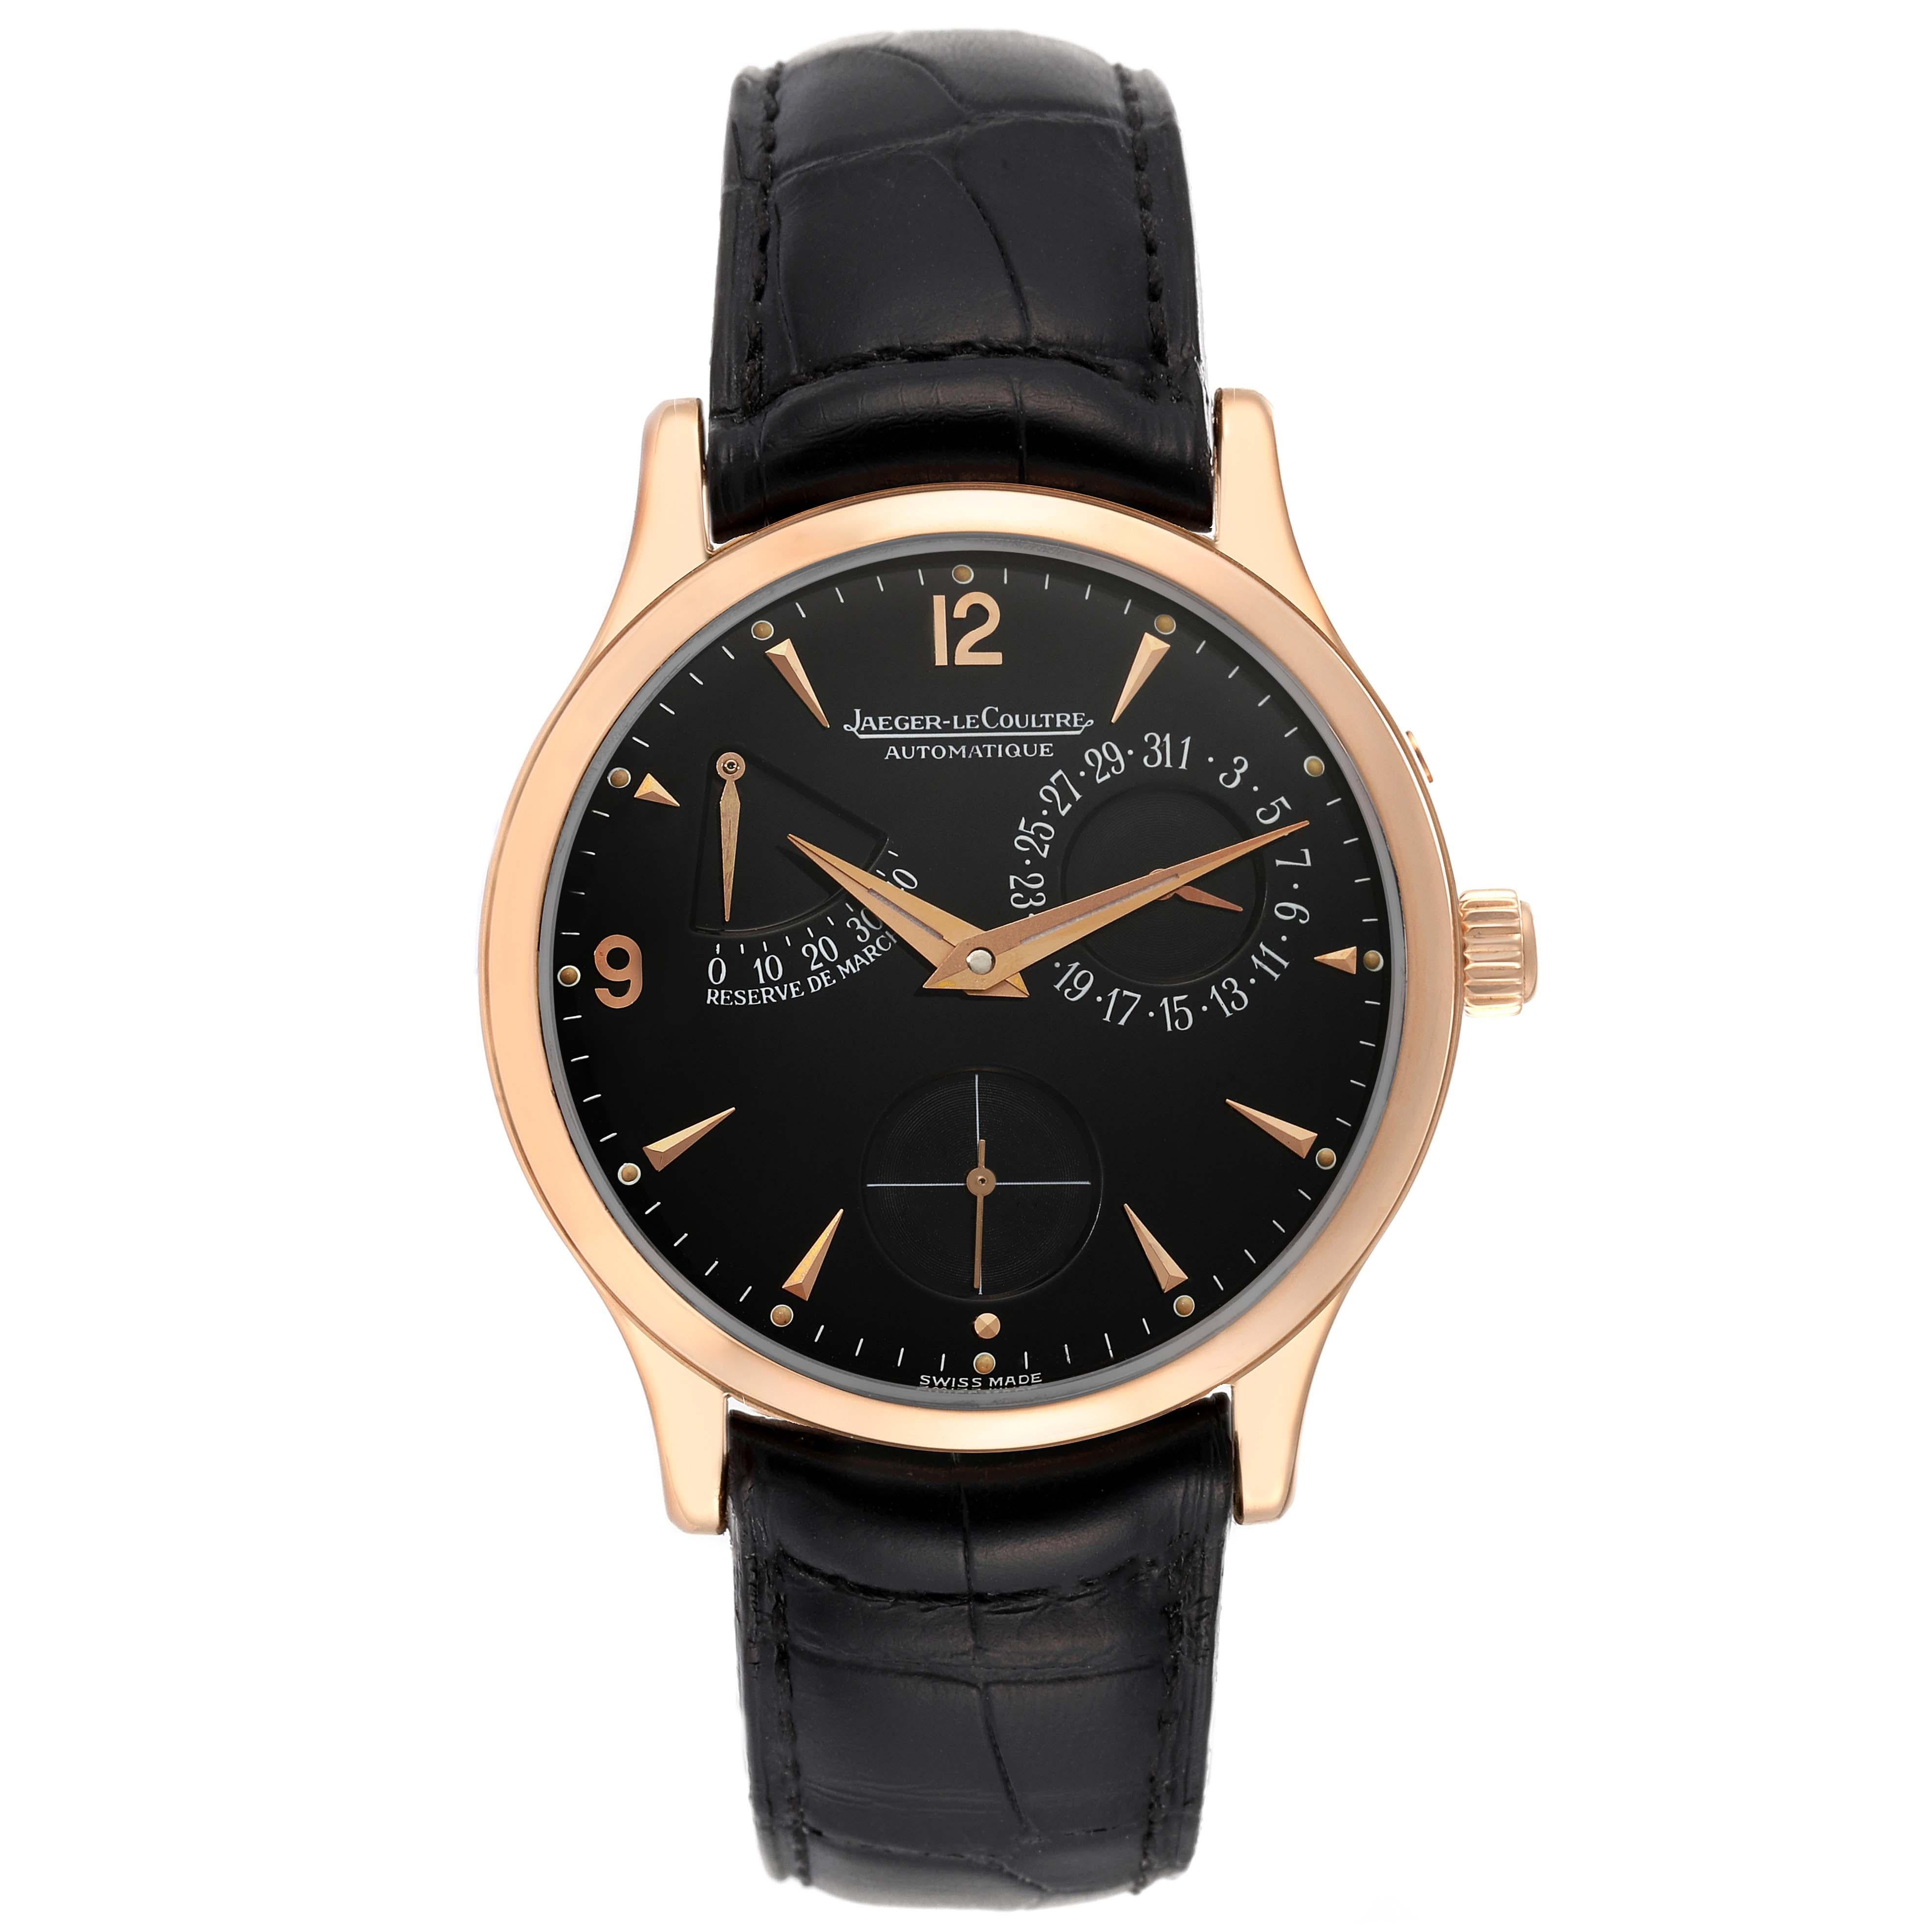 Jaeger LeCoultre Master Reserve De Marche Rose Gold Mens Watch  Box Papers. Self-winding automatic movement. Caliber 928/2, rhodium plated fausses-c?tes decoration, 45 jewels, straight line.lever escapement, monometallic balance adjusted